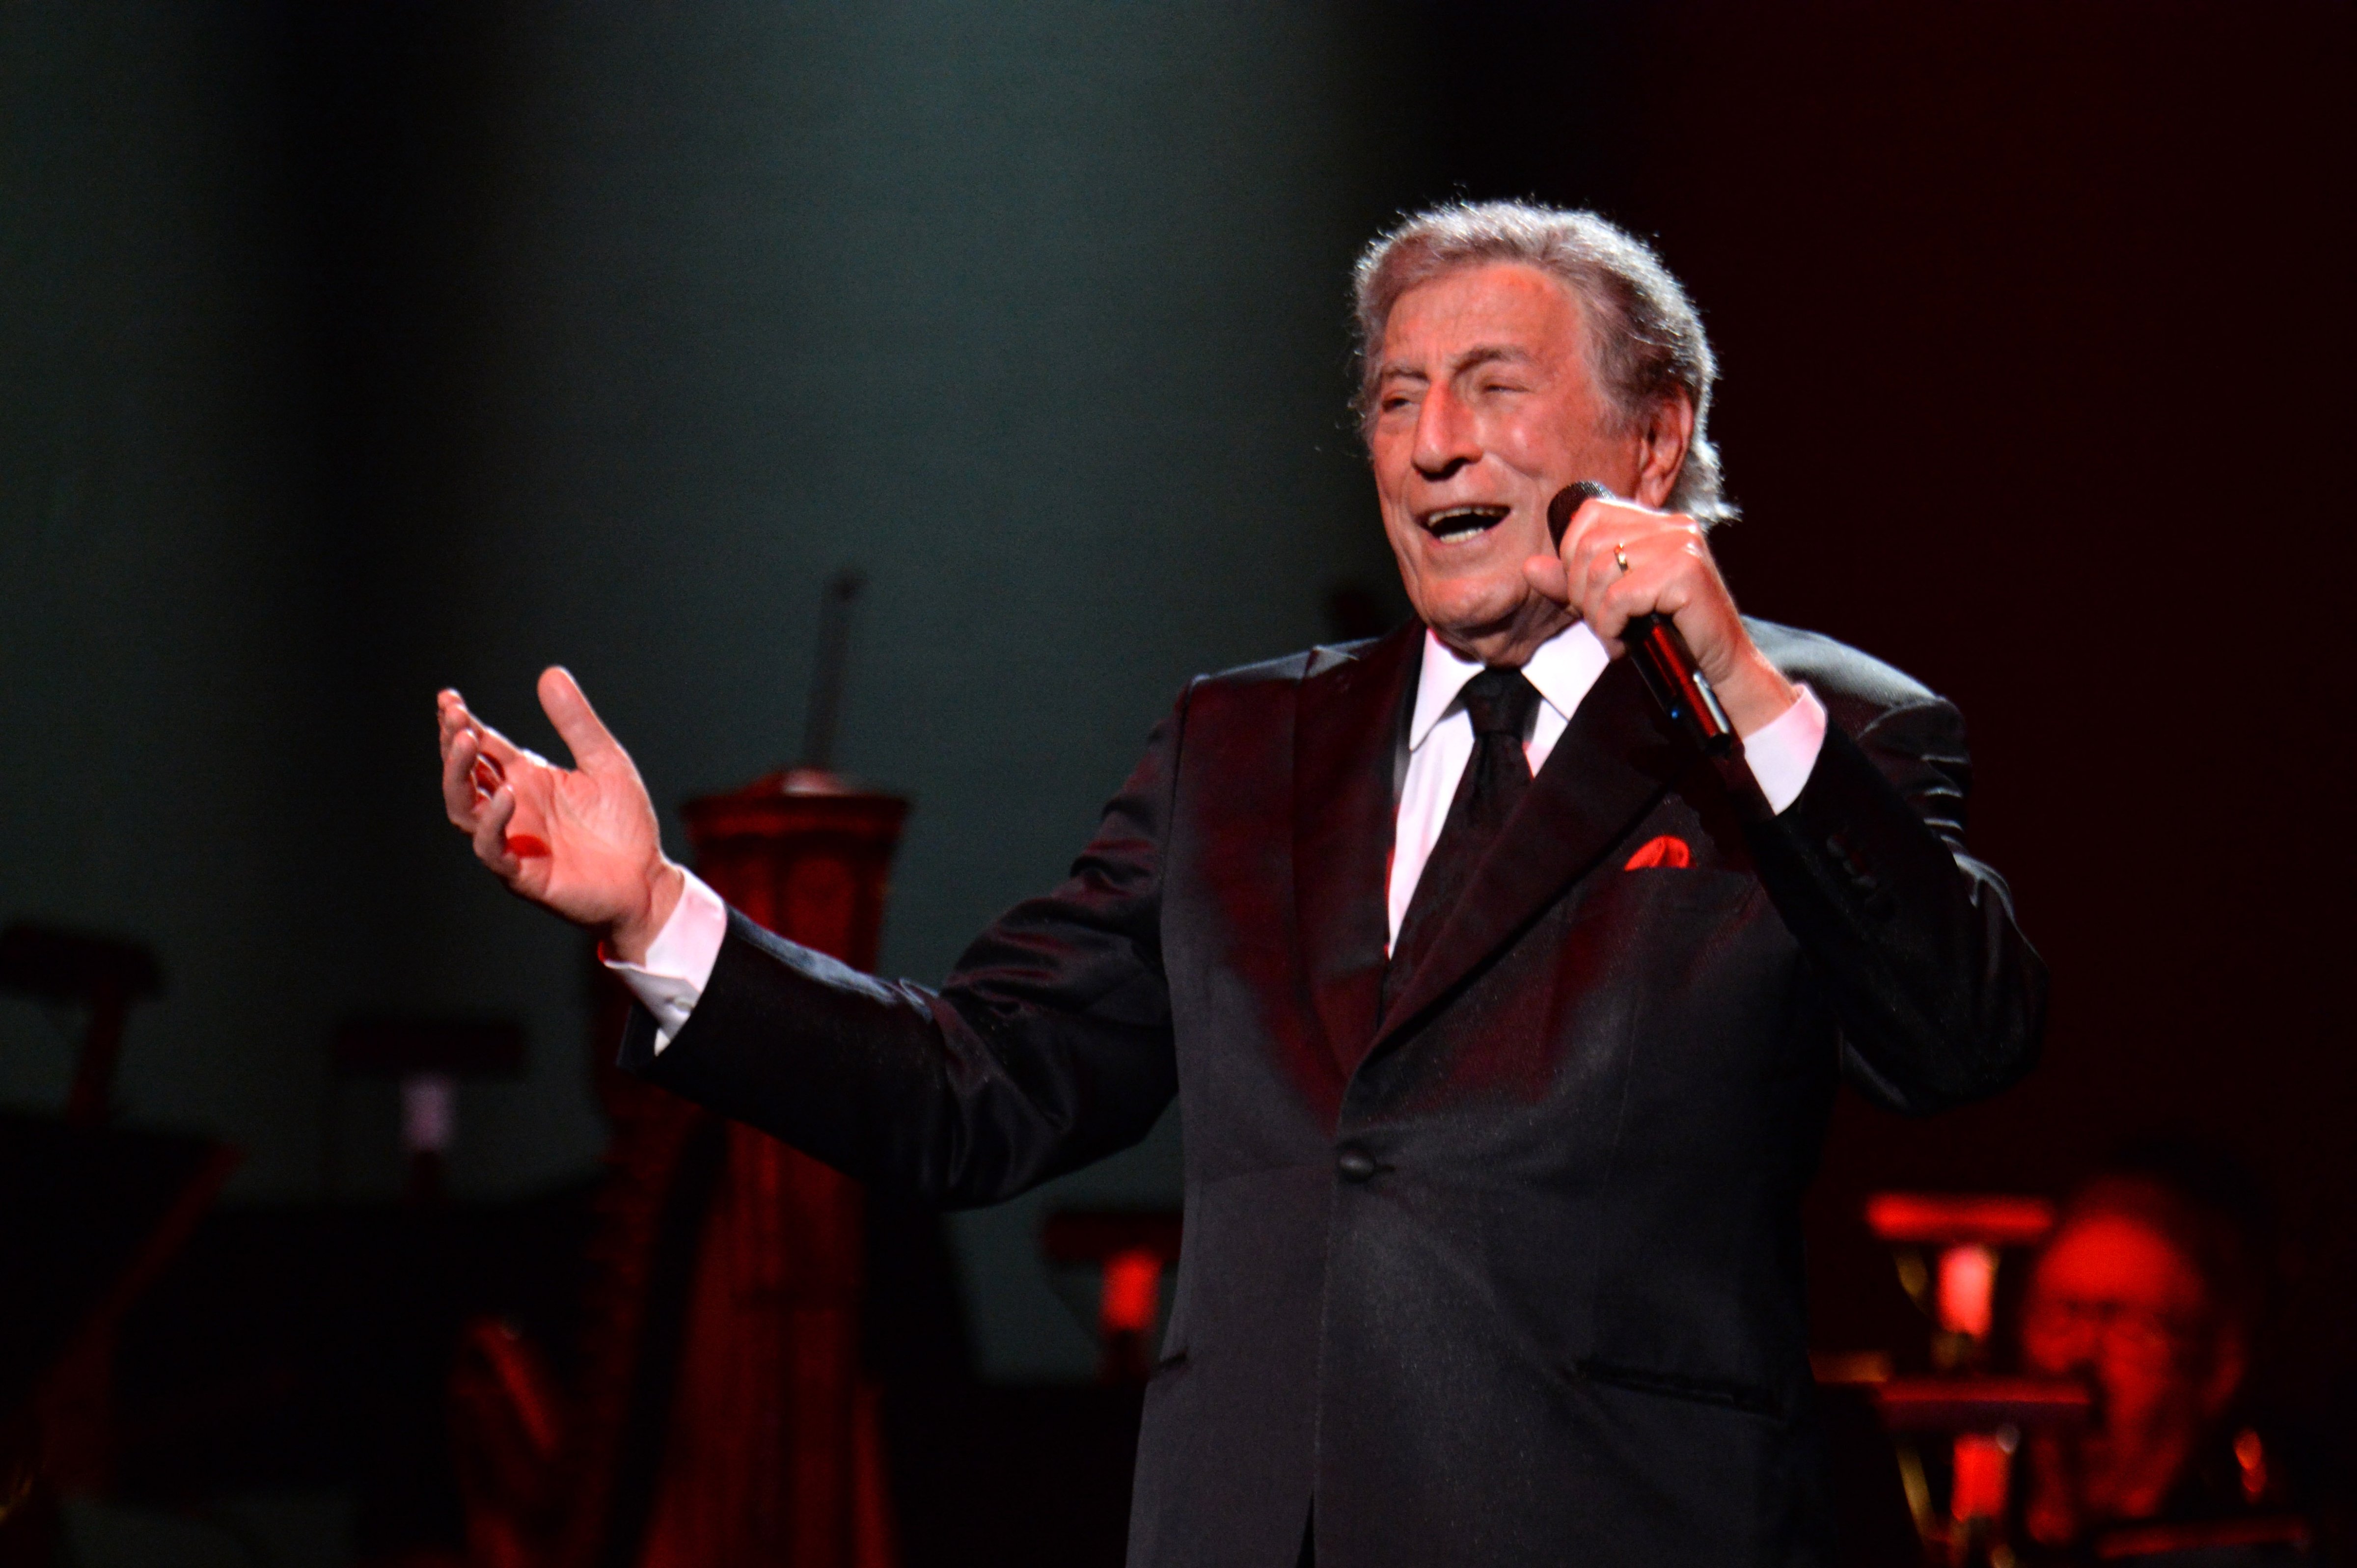 LOS ANGELES, CA - FEBRUARY 08: Tony Bennett performs onstage with Lady Gaga in support of their award winning album "Cheek To Cheek" at The Wiltern on February 8, 2015 (Kevin Mazur&mdash;Getty Images for Citi)